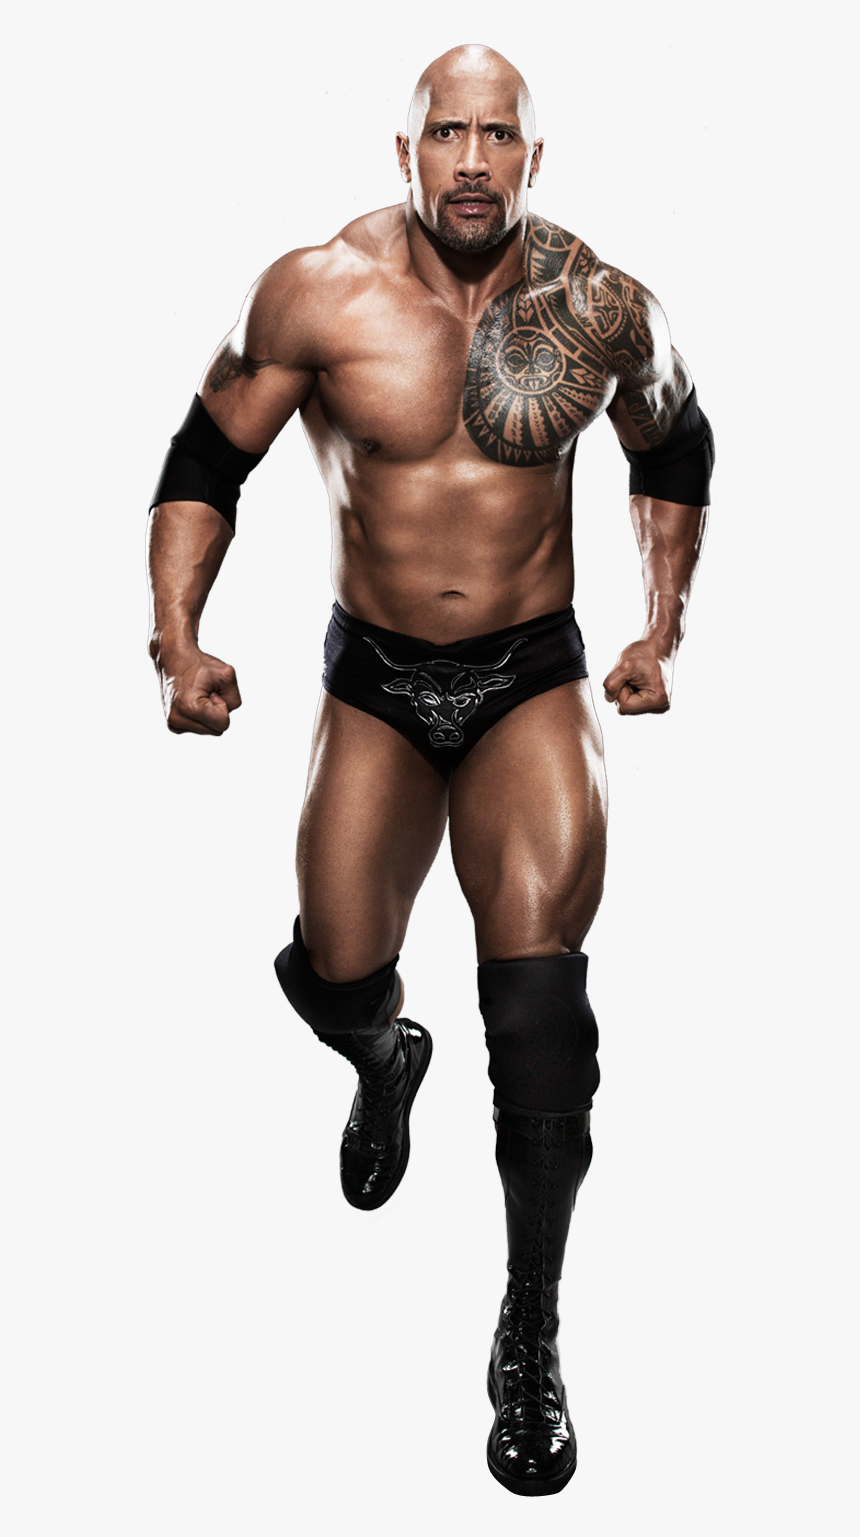 Image The Rock Cutout - Dwayne Johnson Transparent Background, HD Png Download, Free Download